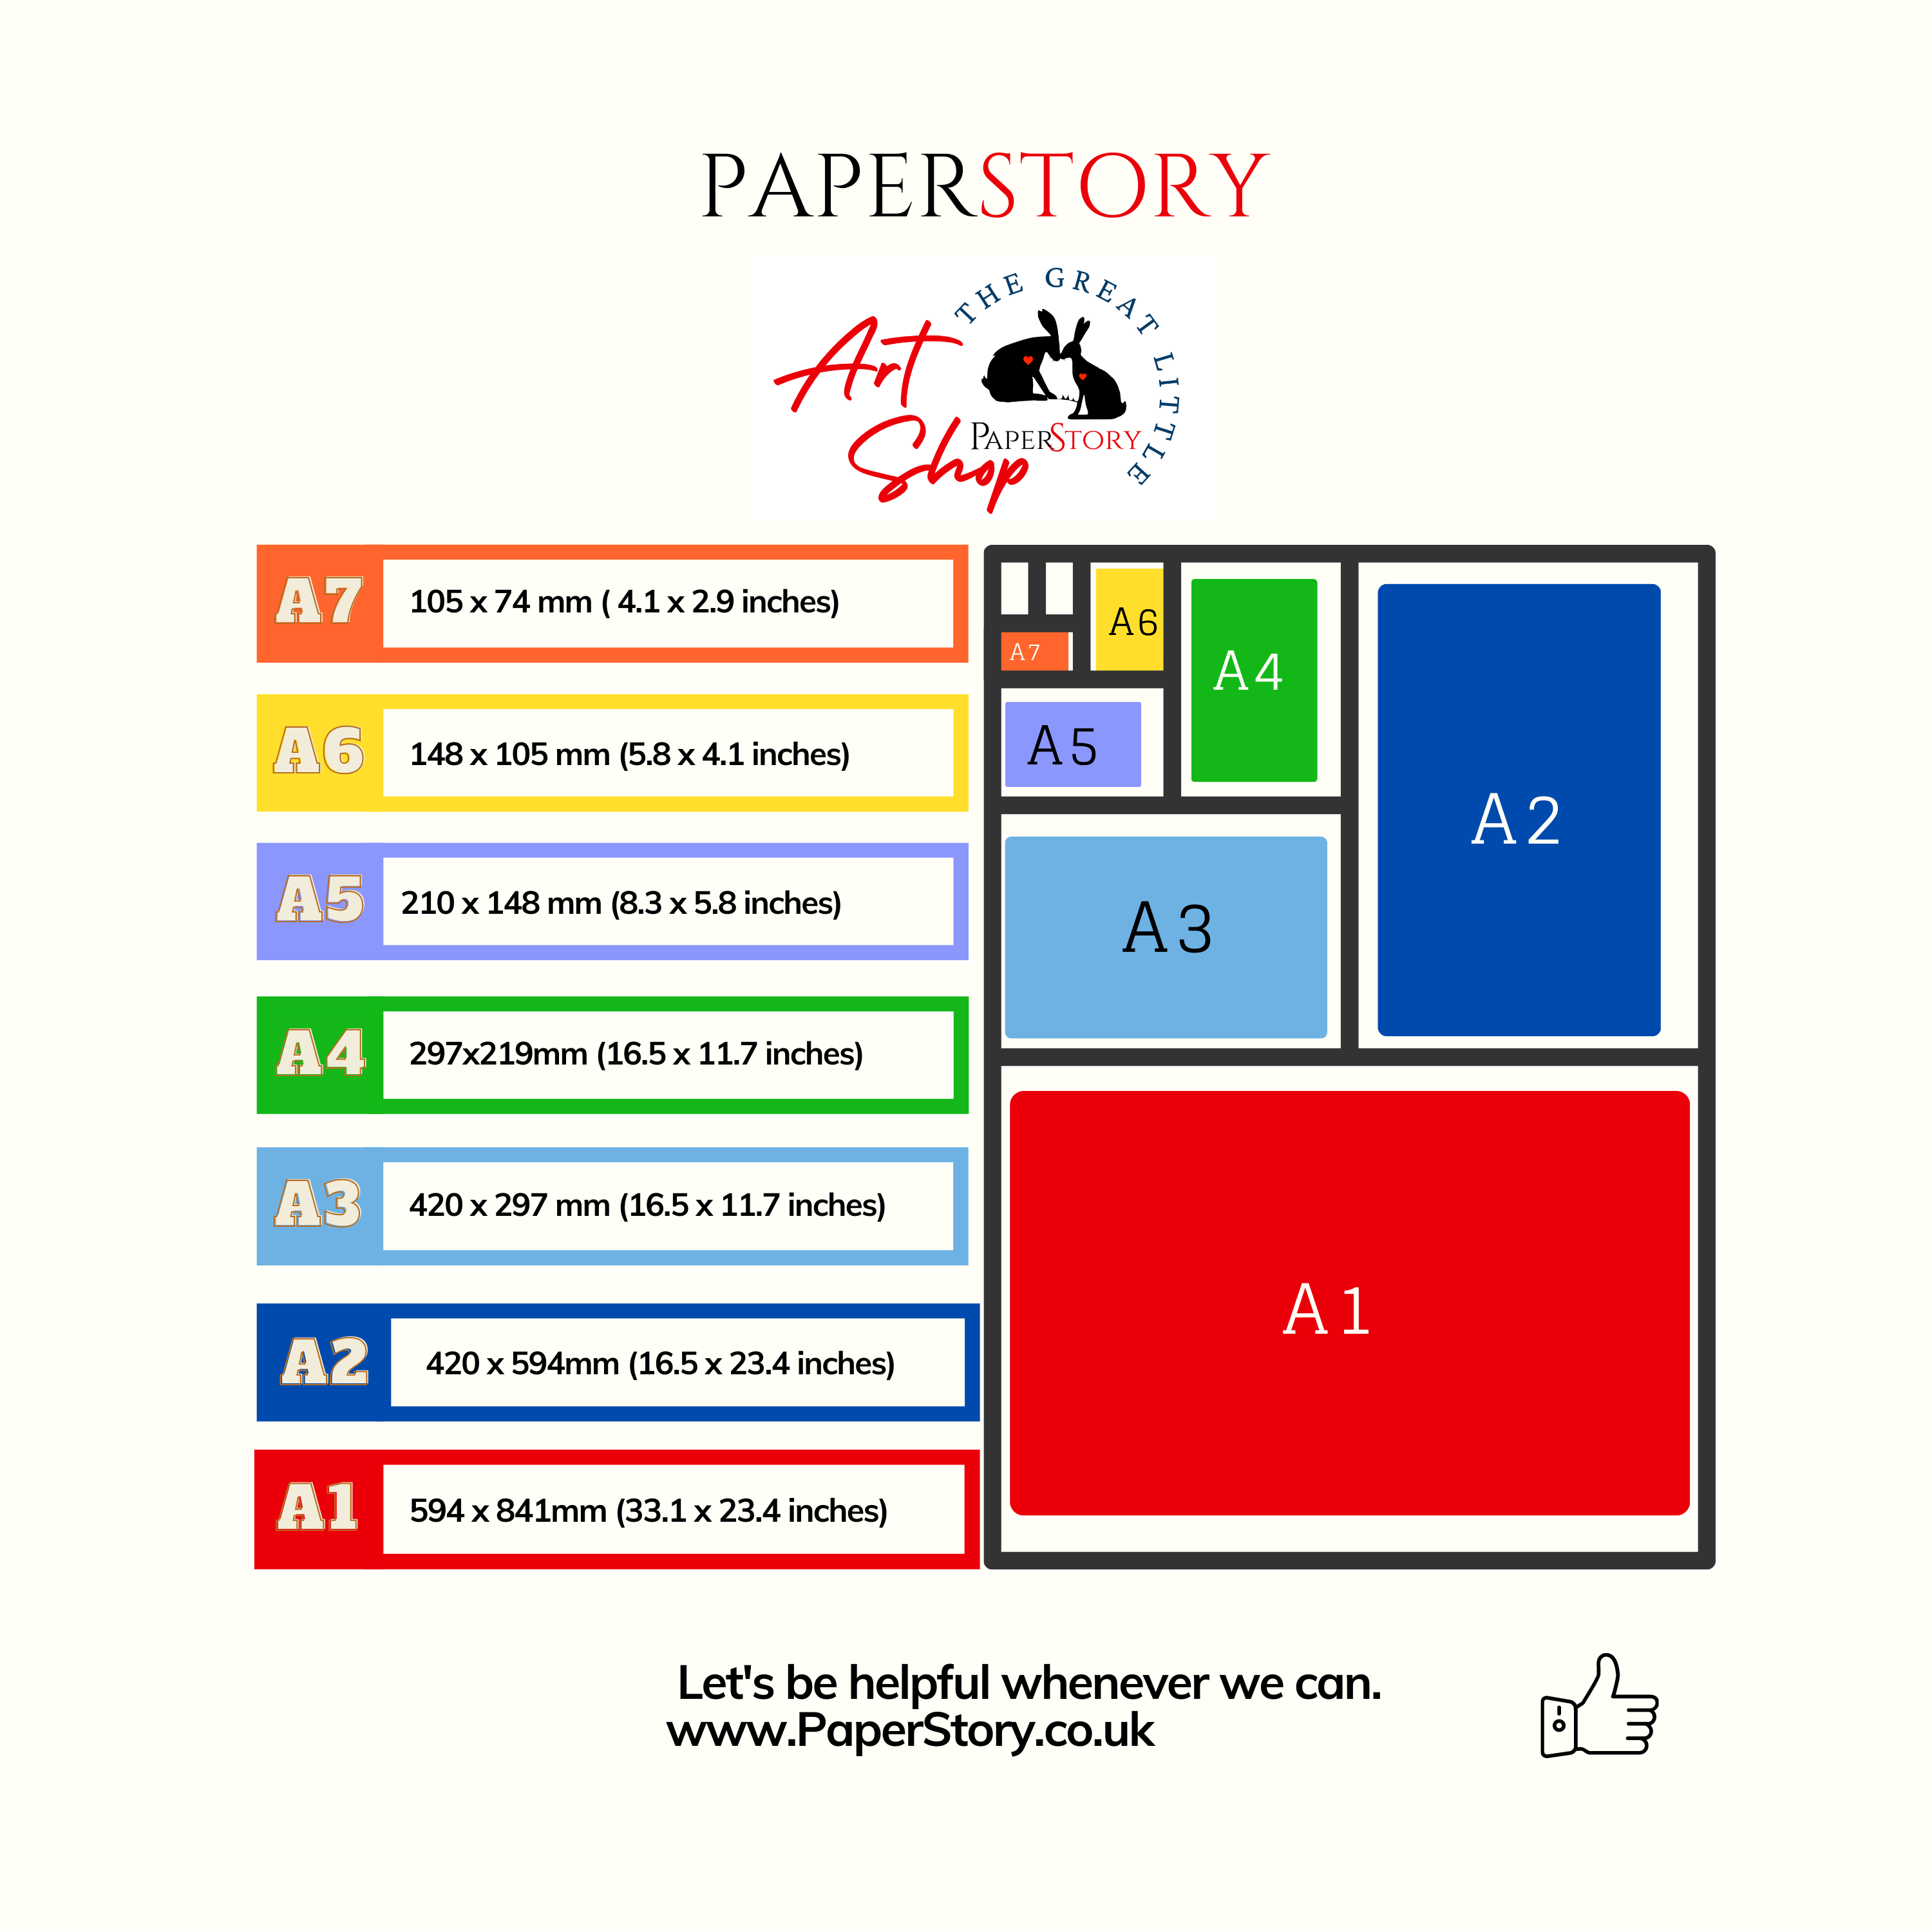 A4 Size Paper, Standard UK Paper Sizes